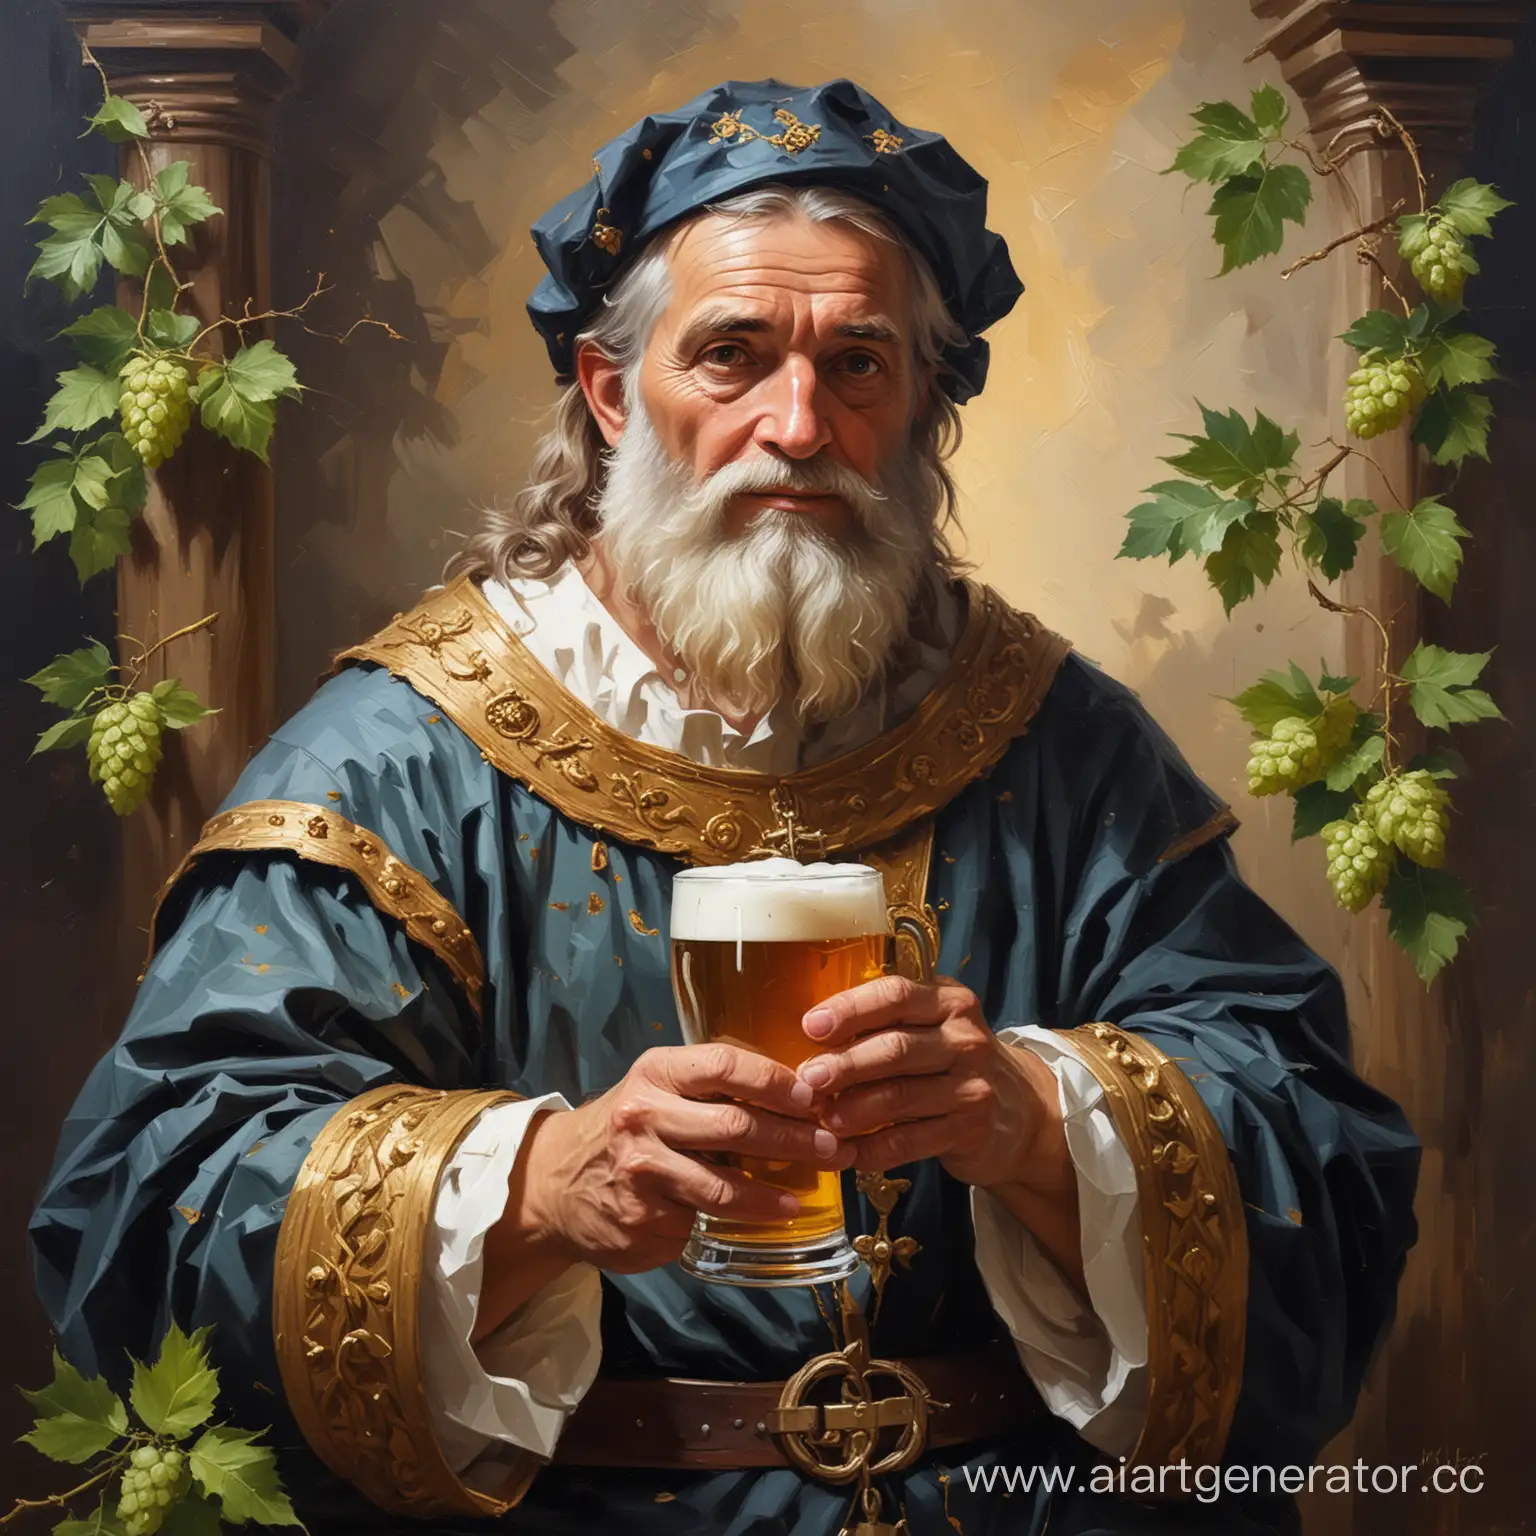 Bold-Expressive-Oil-Portrait-God-of-Beer-in-Church-Attire-with-Hops